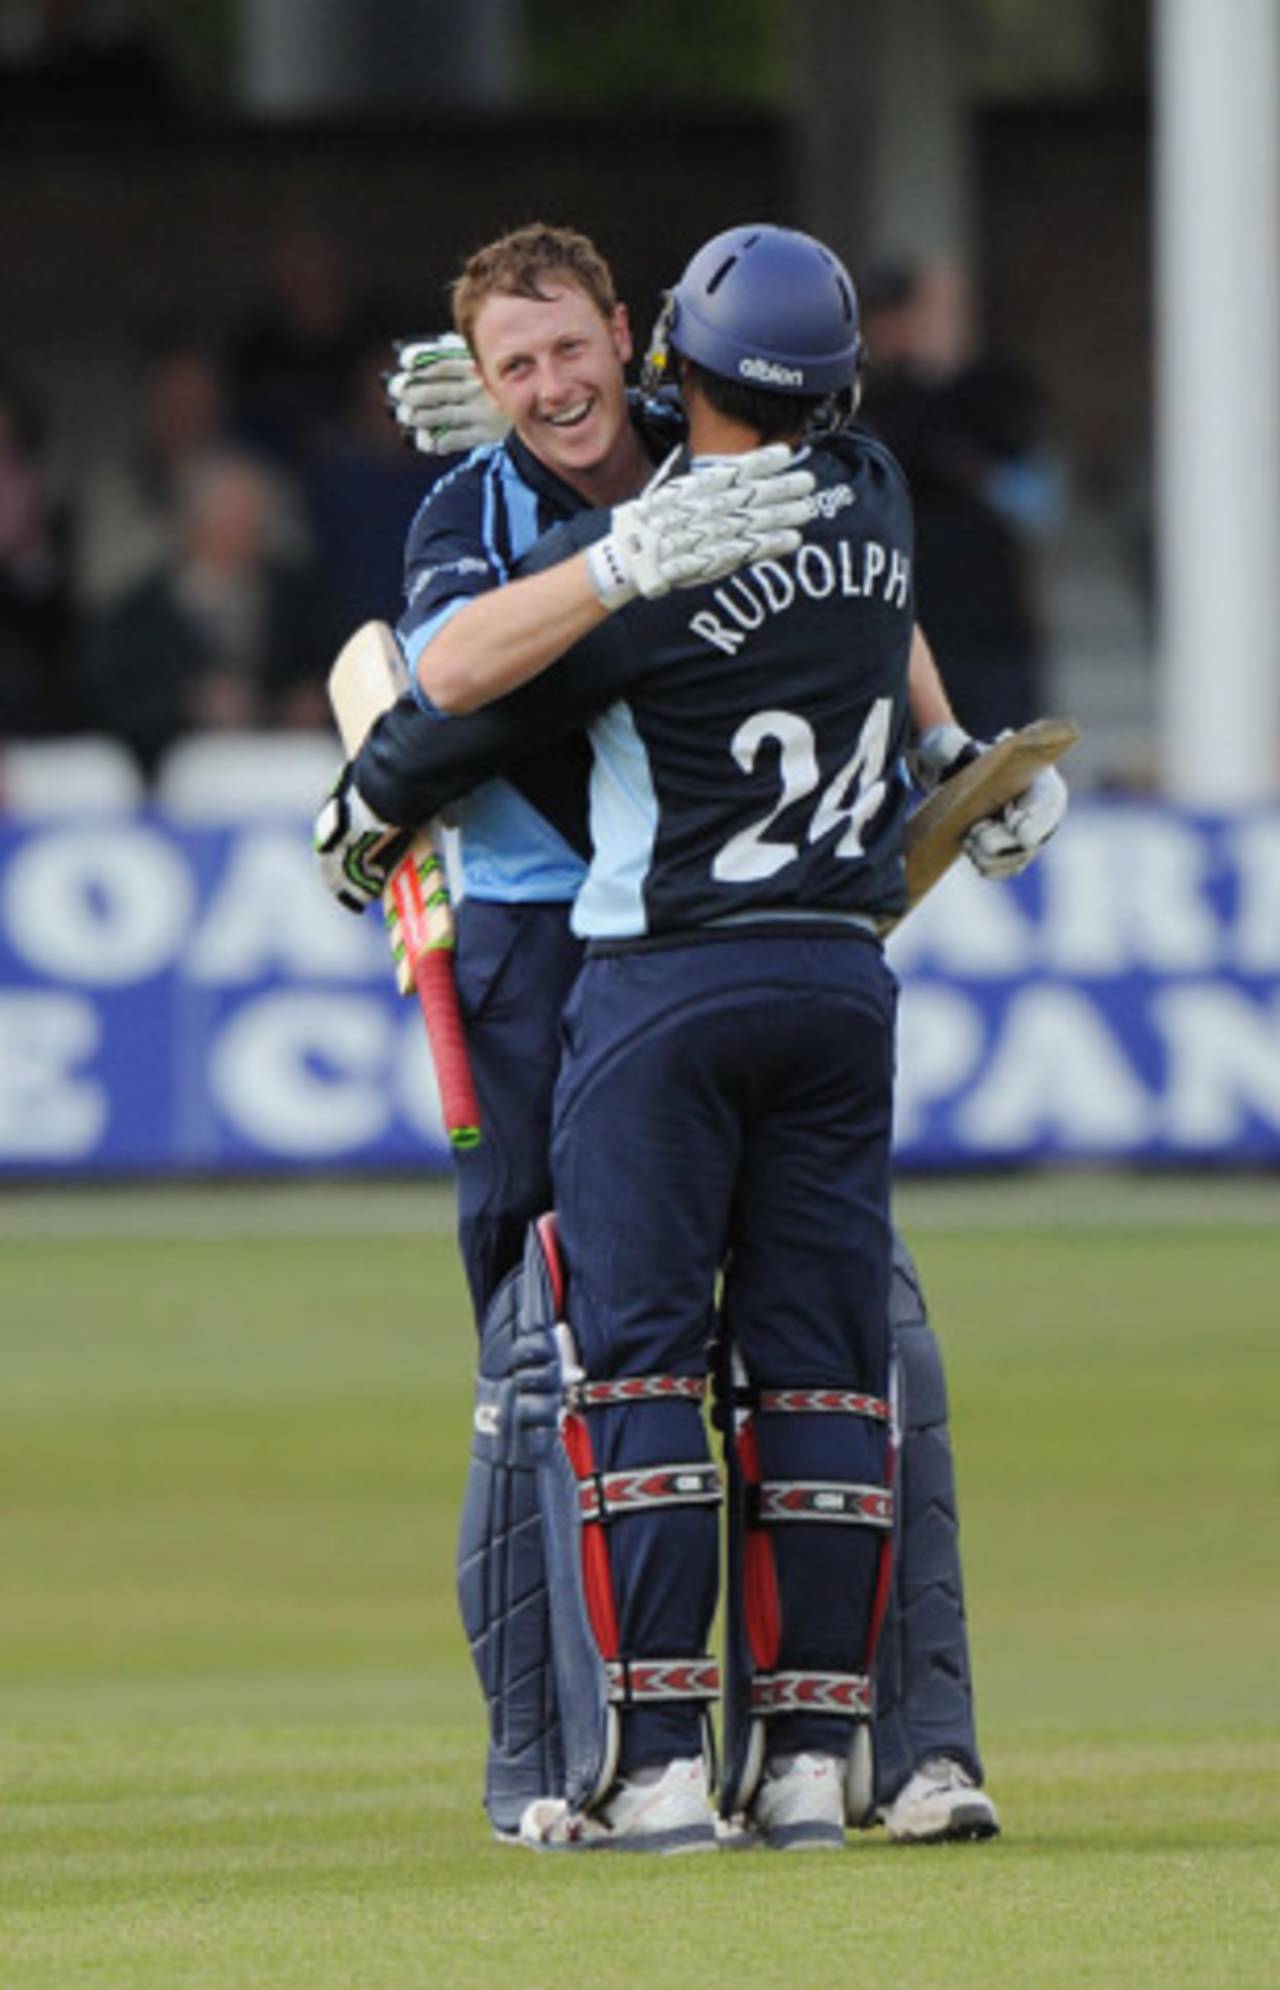 Andrew Gale and Jacques Rudolph shared an unbeaten opening stand of 233 to win the game, Essex v Yorkshire, Clydesdale Bank 40, Group B, Chelmsford, April 25, 2010